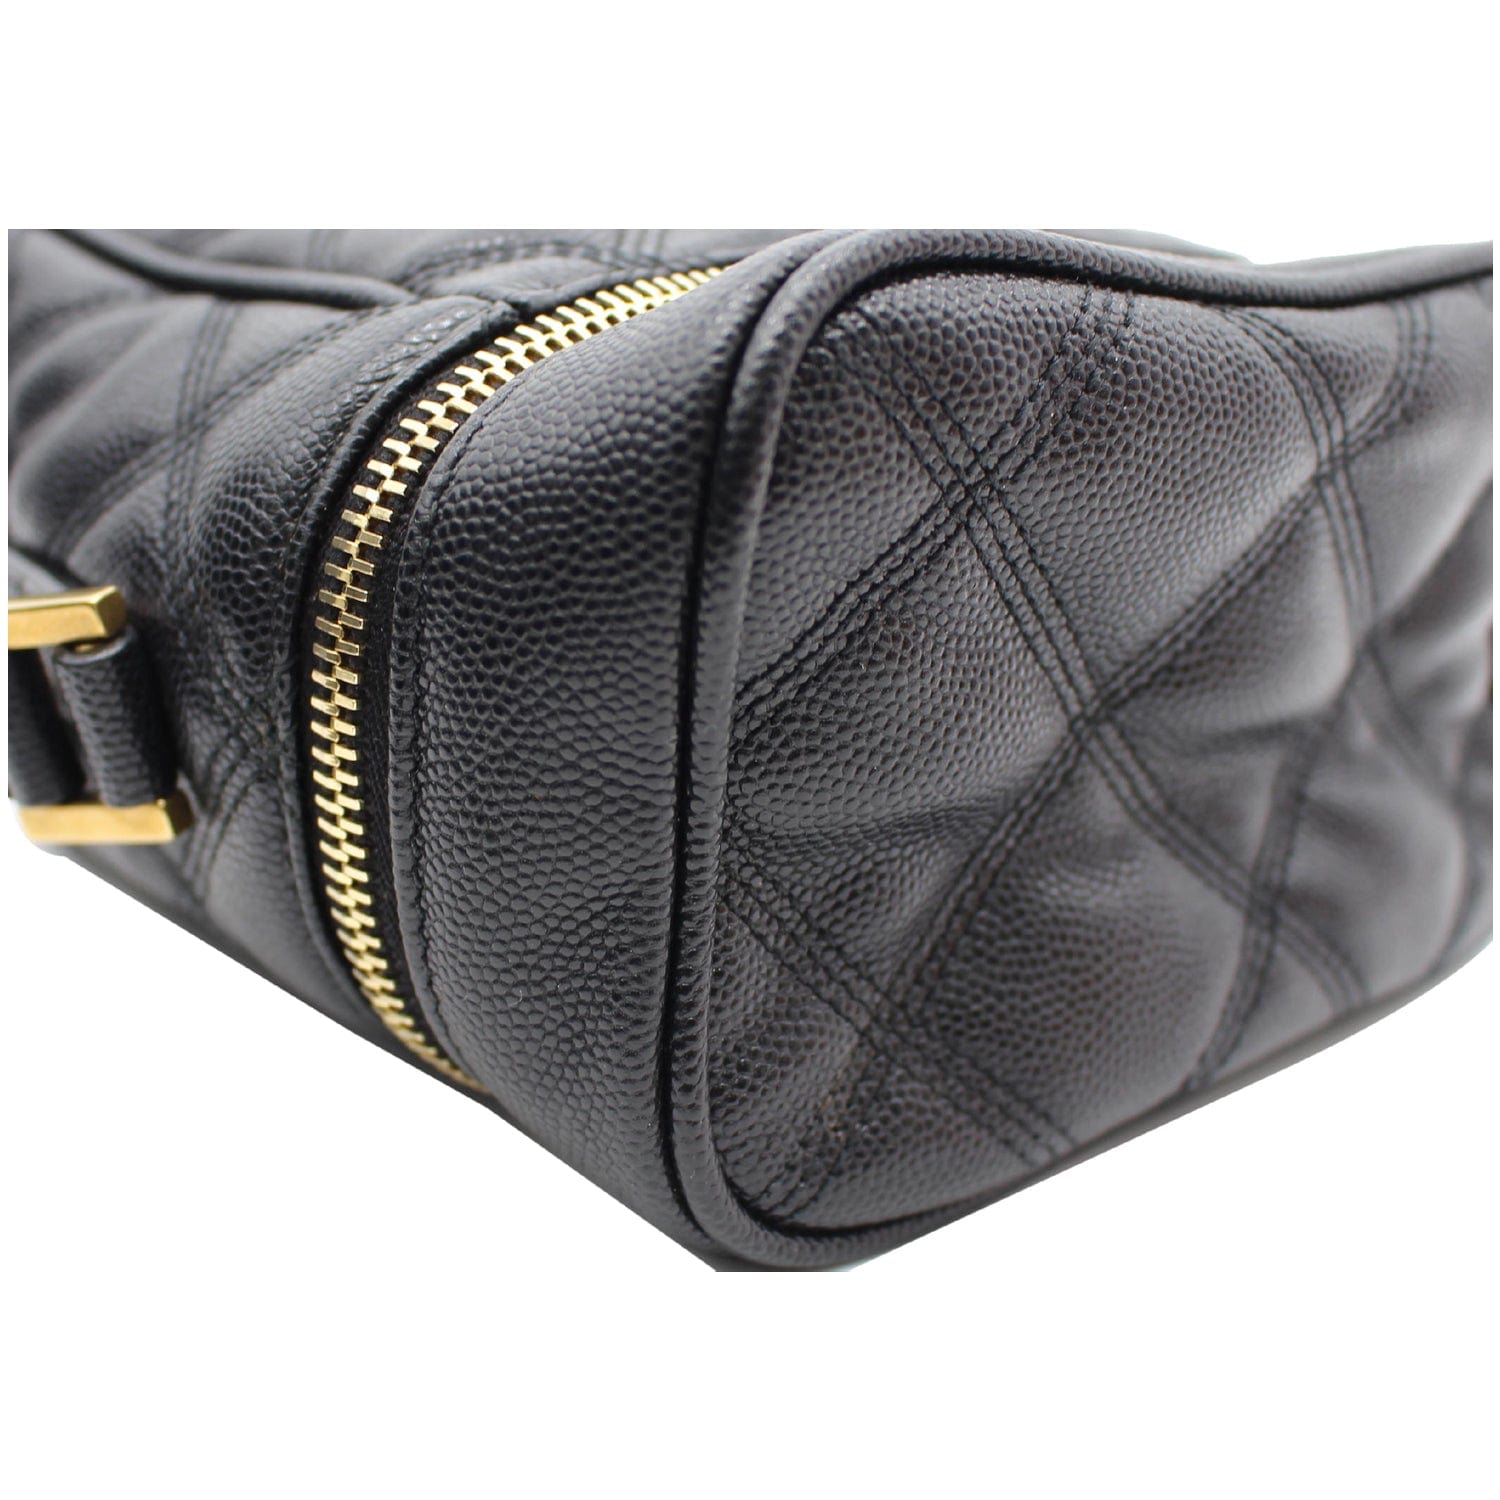 Yves Saint Laurent (YSL) Quilted Shoulder Bag %100 Real Leather. Size:  23x15 cm. We will send with dust bag and box.